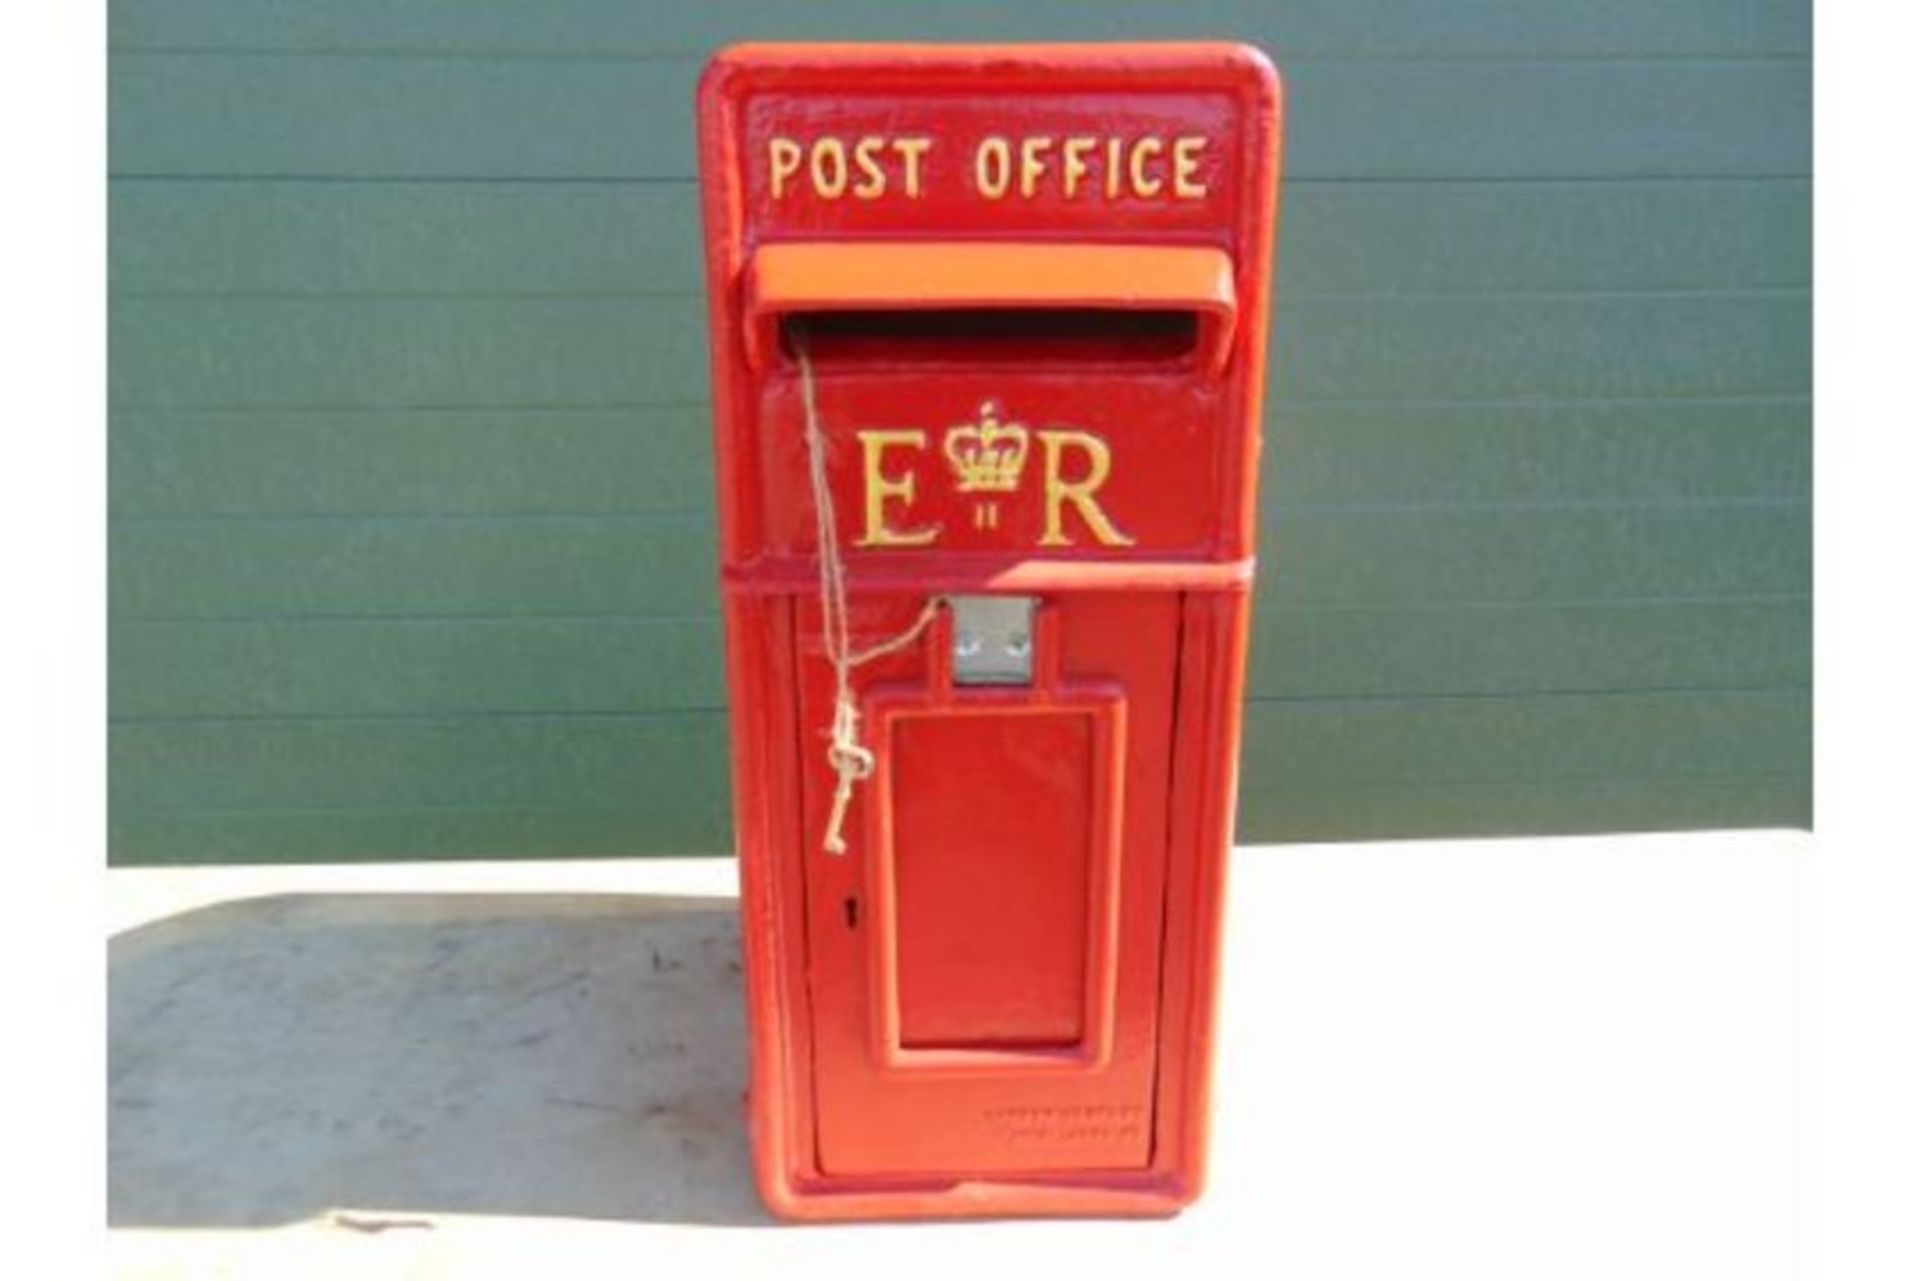 ER Red Post Box C/w Keys, collection times, etc